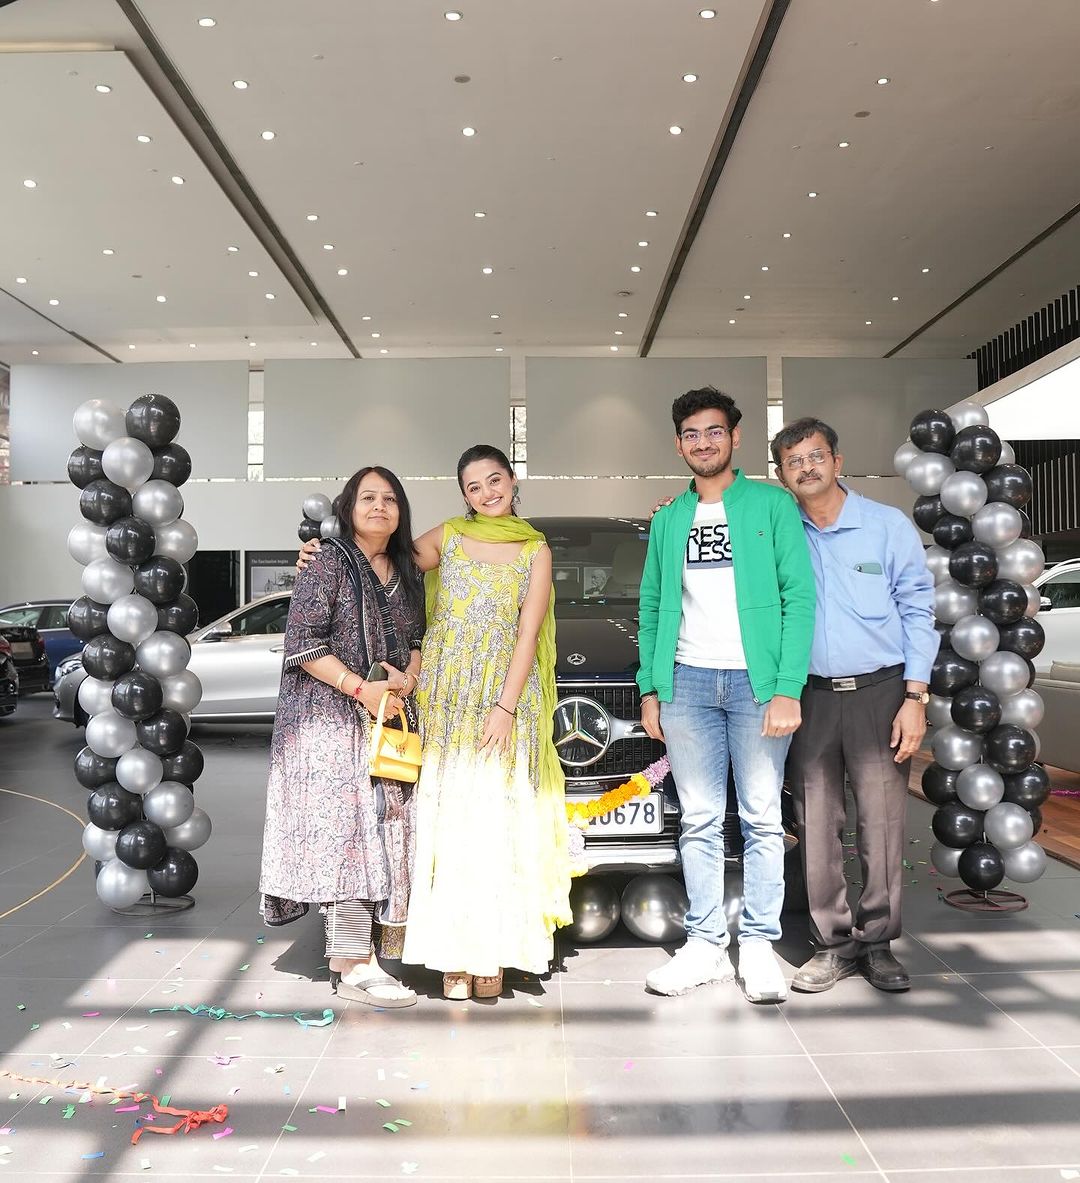 Beautiful Actress Helly Shah Gifted Herself An Expensive Car On Ram Mandir Pran Pratishthan: She Says “What Better Day Than Today’